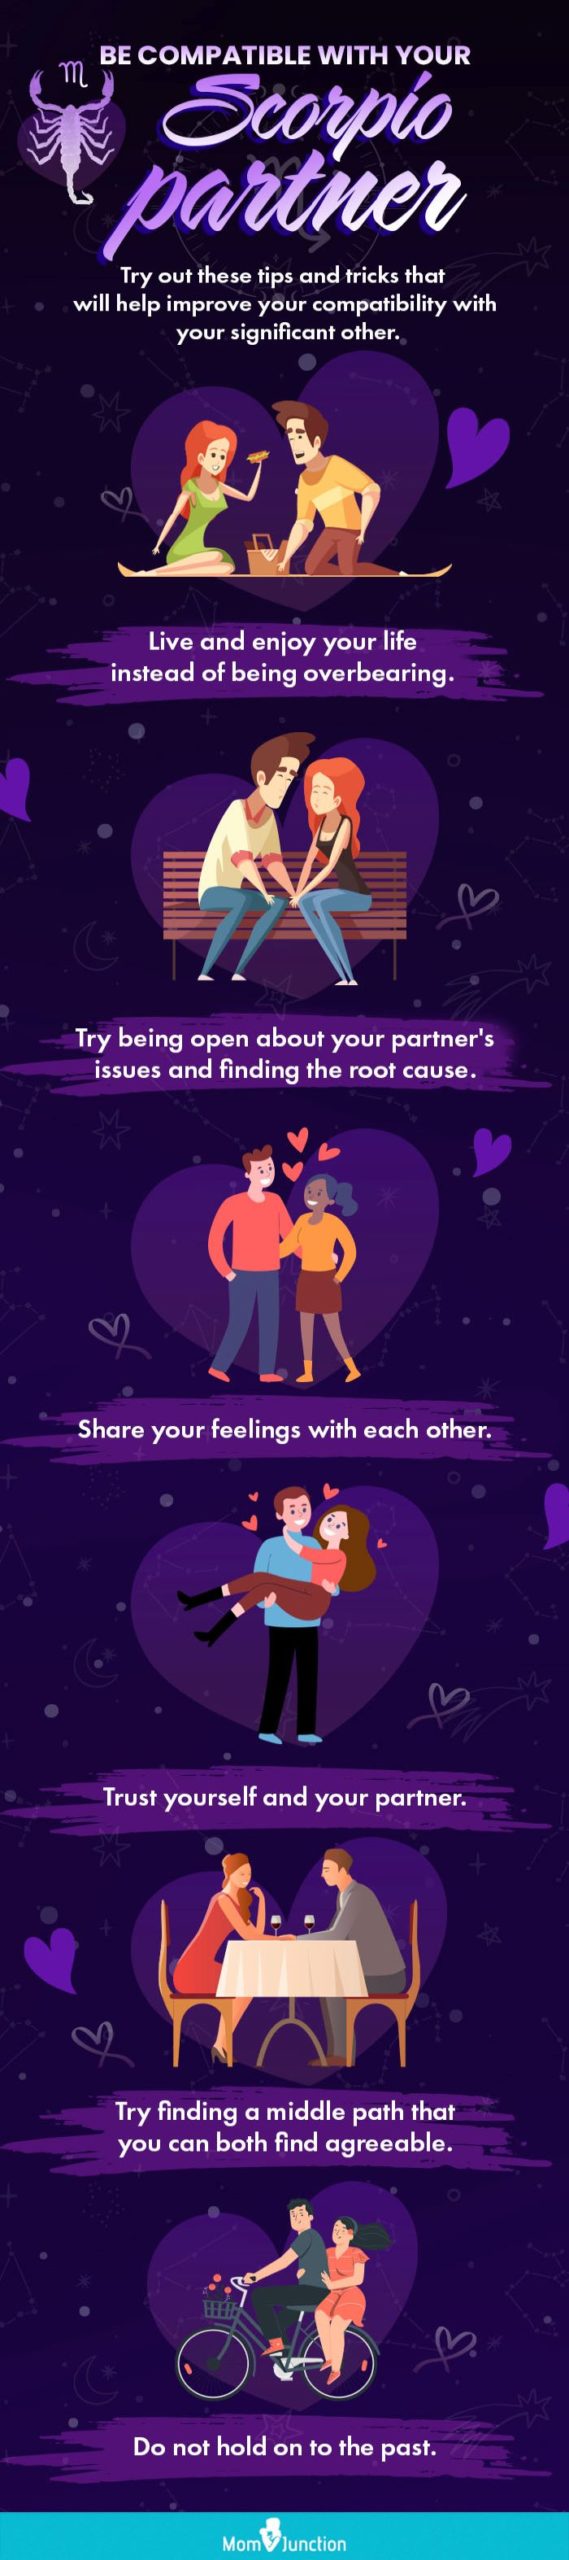 be compatible with your scorpio partner (infographic)